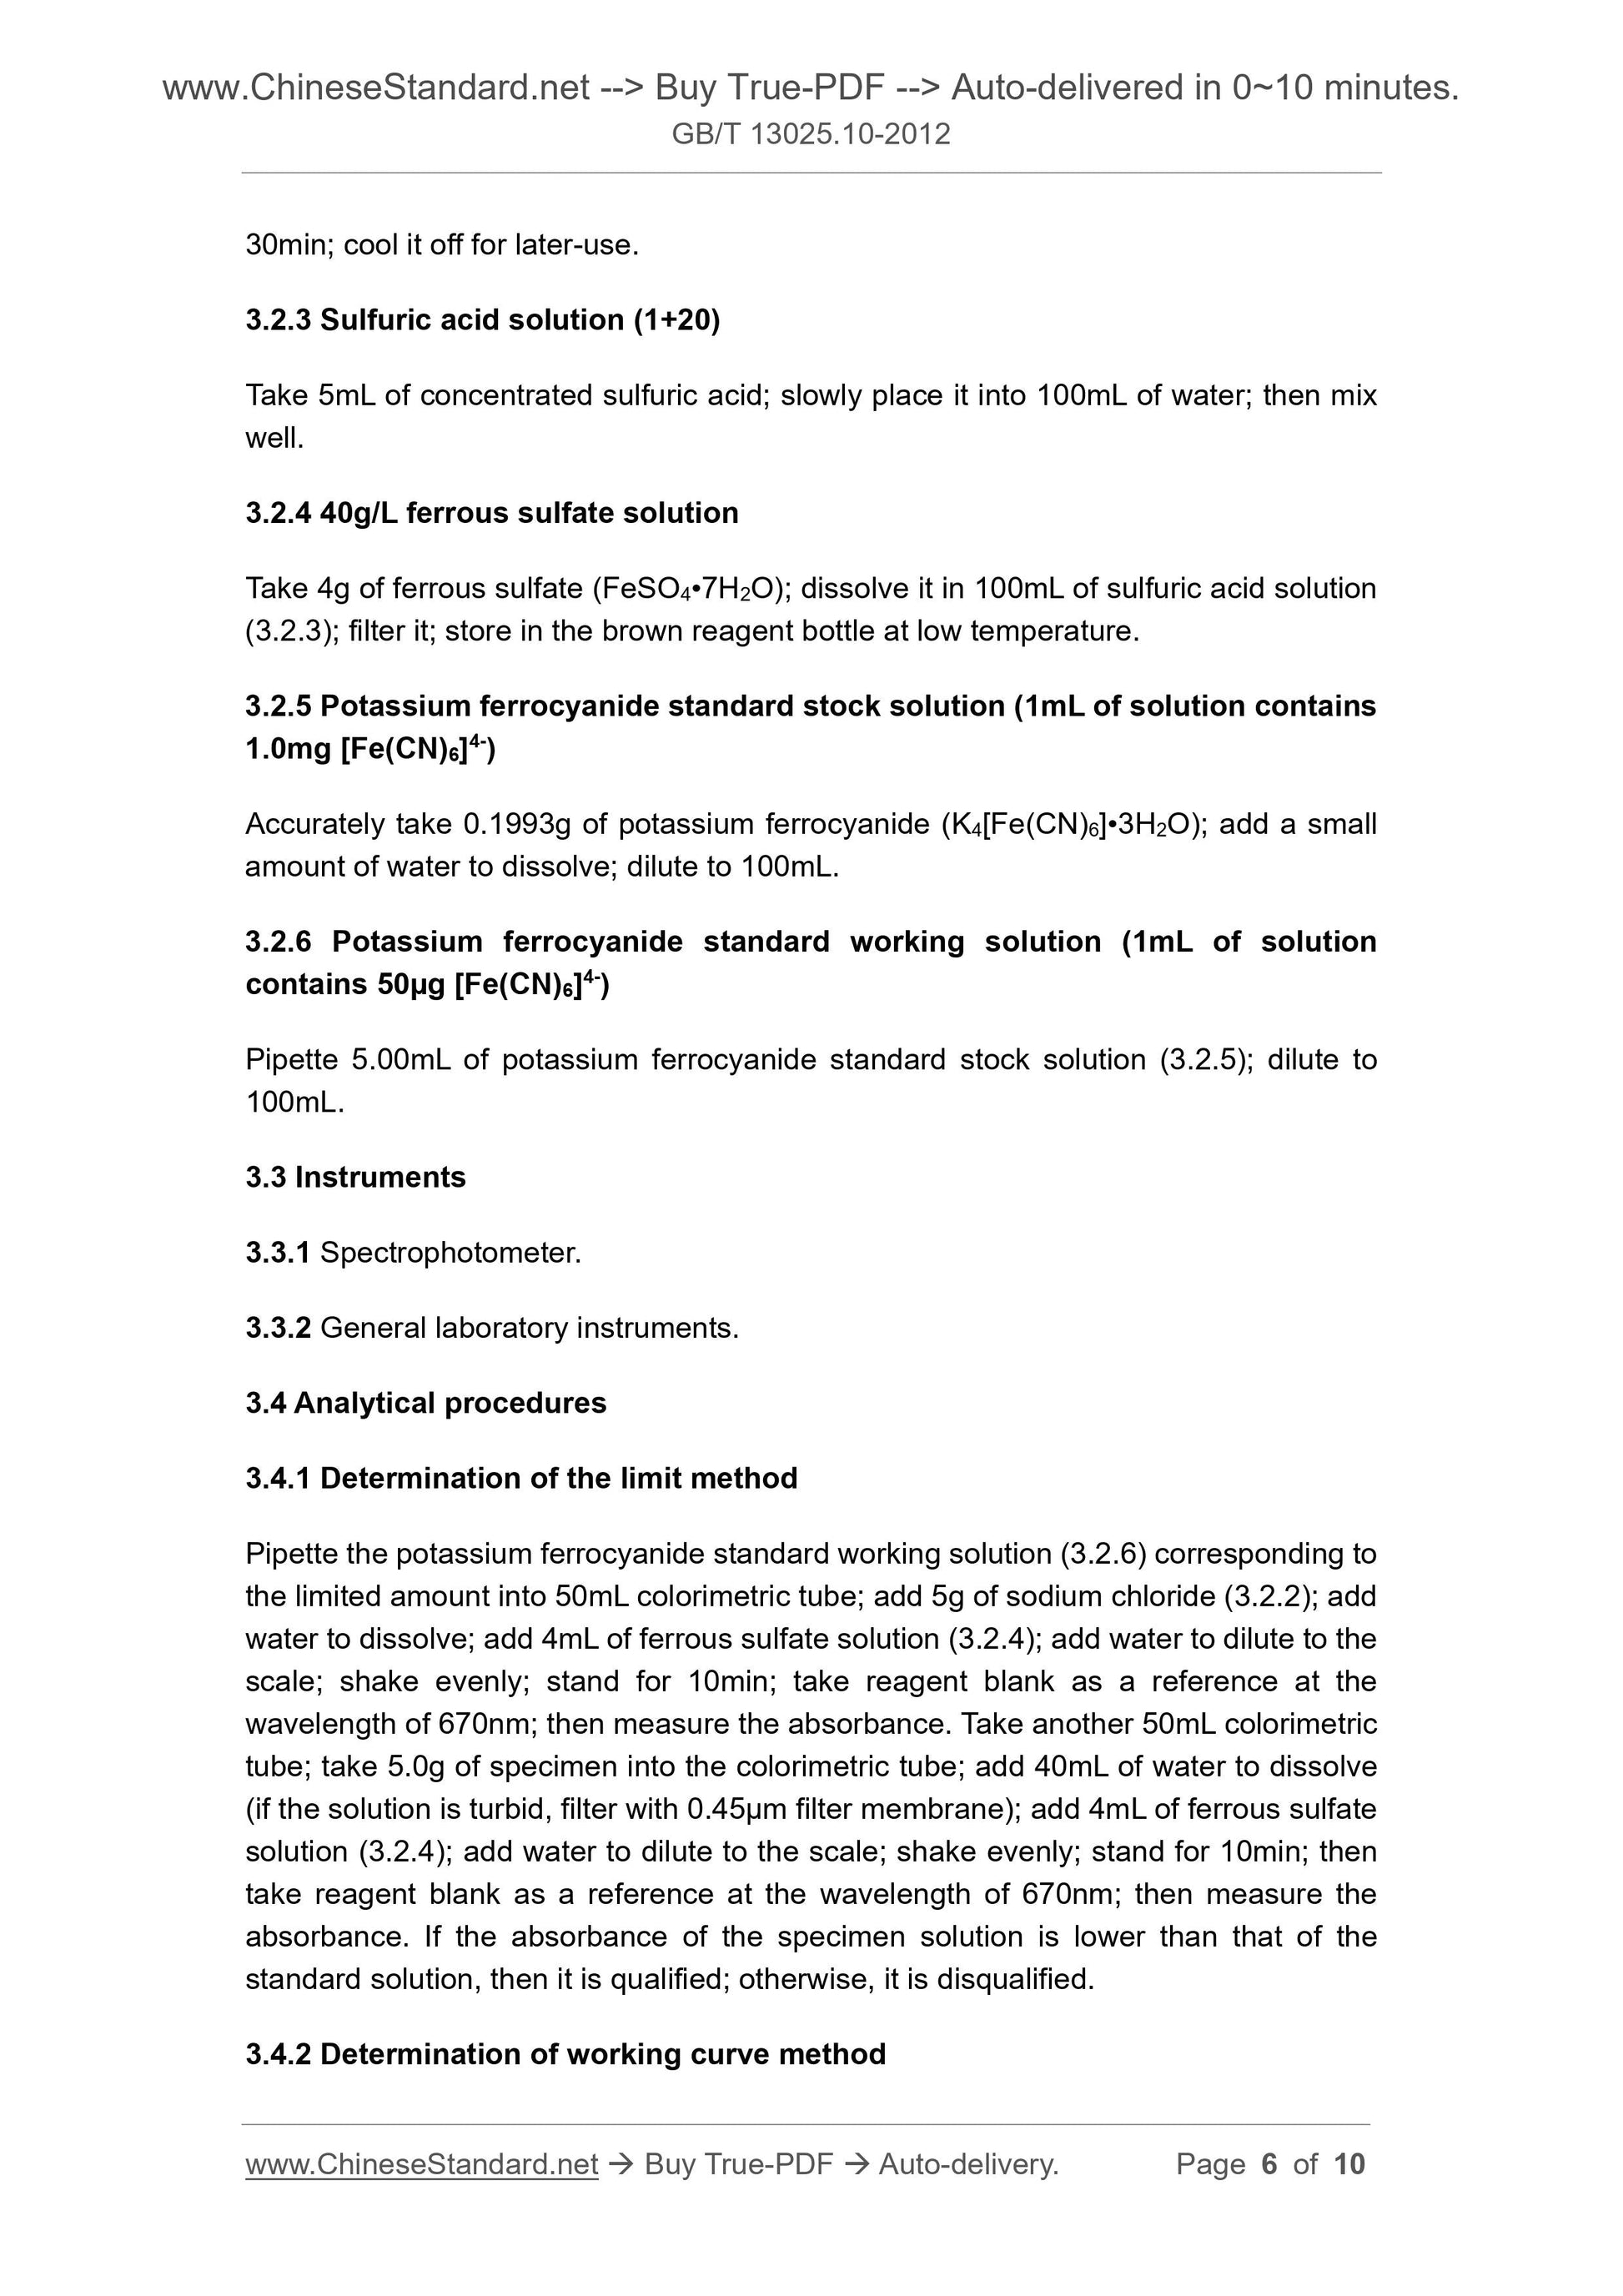 GB/T 13025.10-2012 Page 5